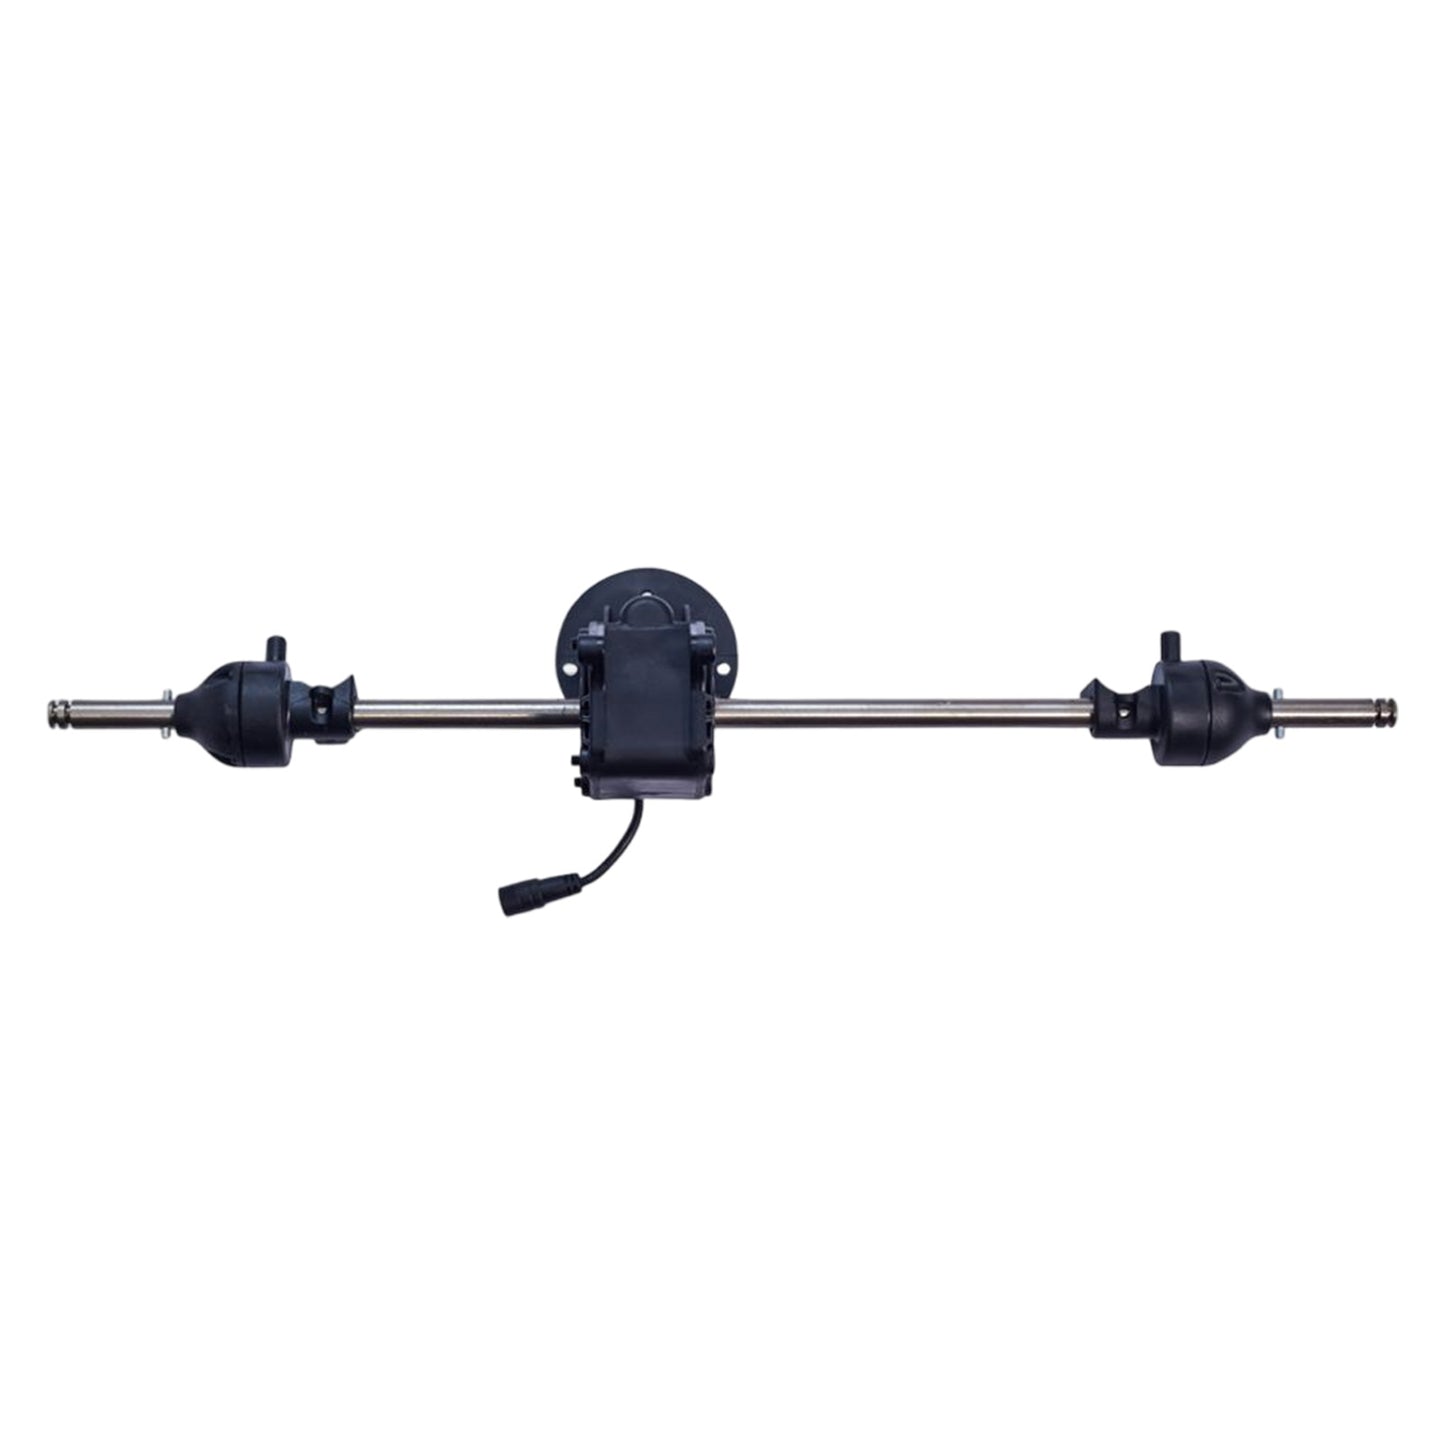 Motocaddy Gearbox & Axle With Distance - MCGB-01-DIST